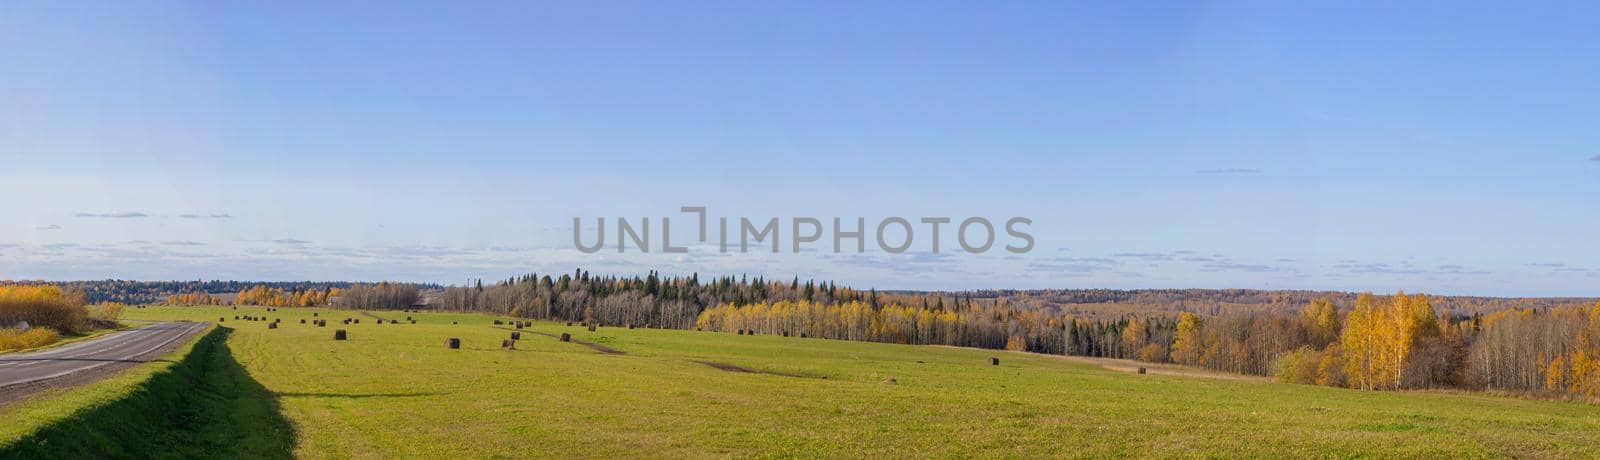 Road between fields with hay bales in autumn. panarama, golden autumn by AnatoliiFoto